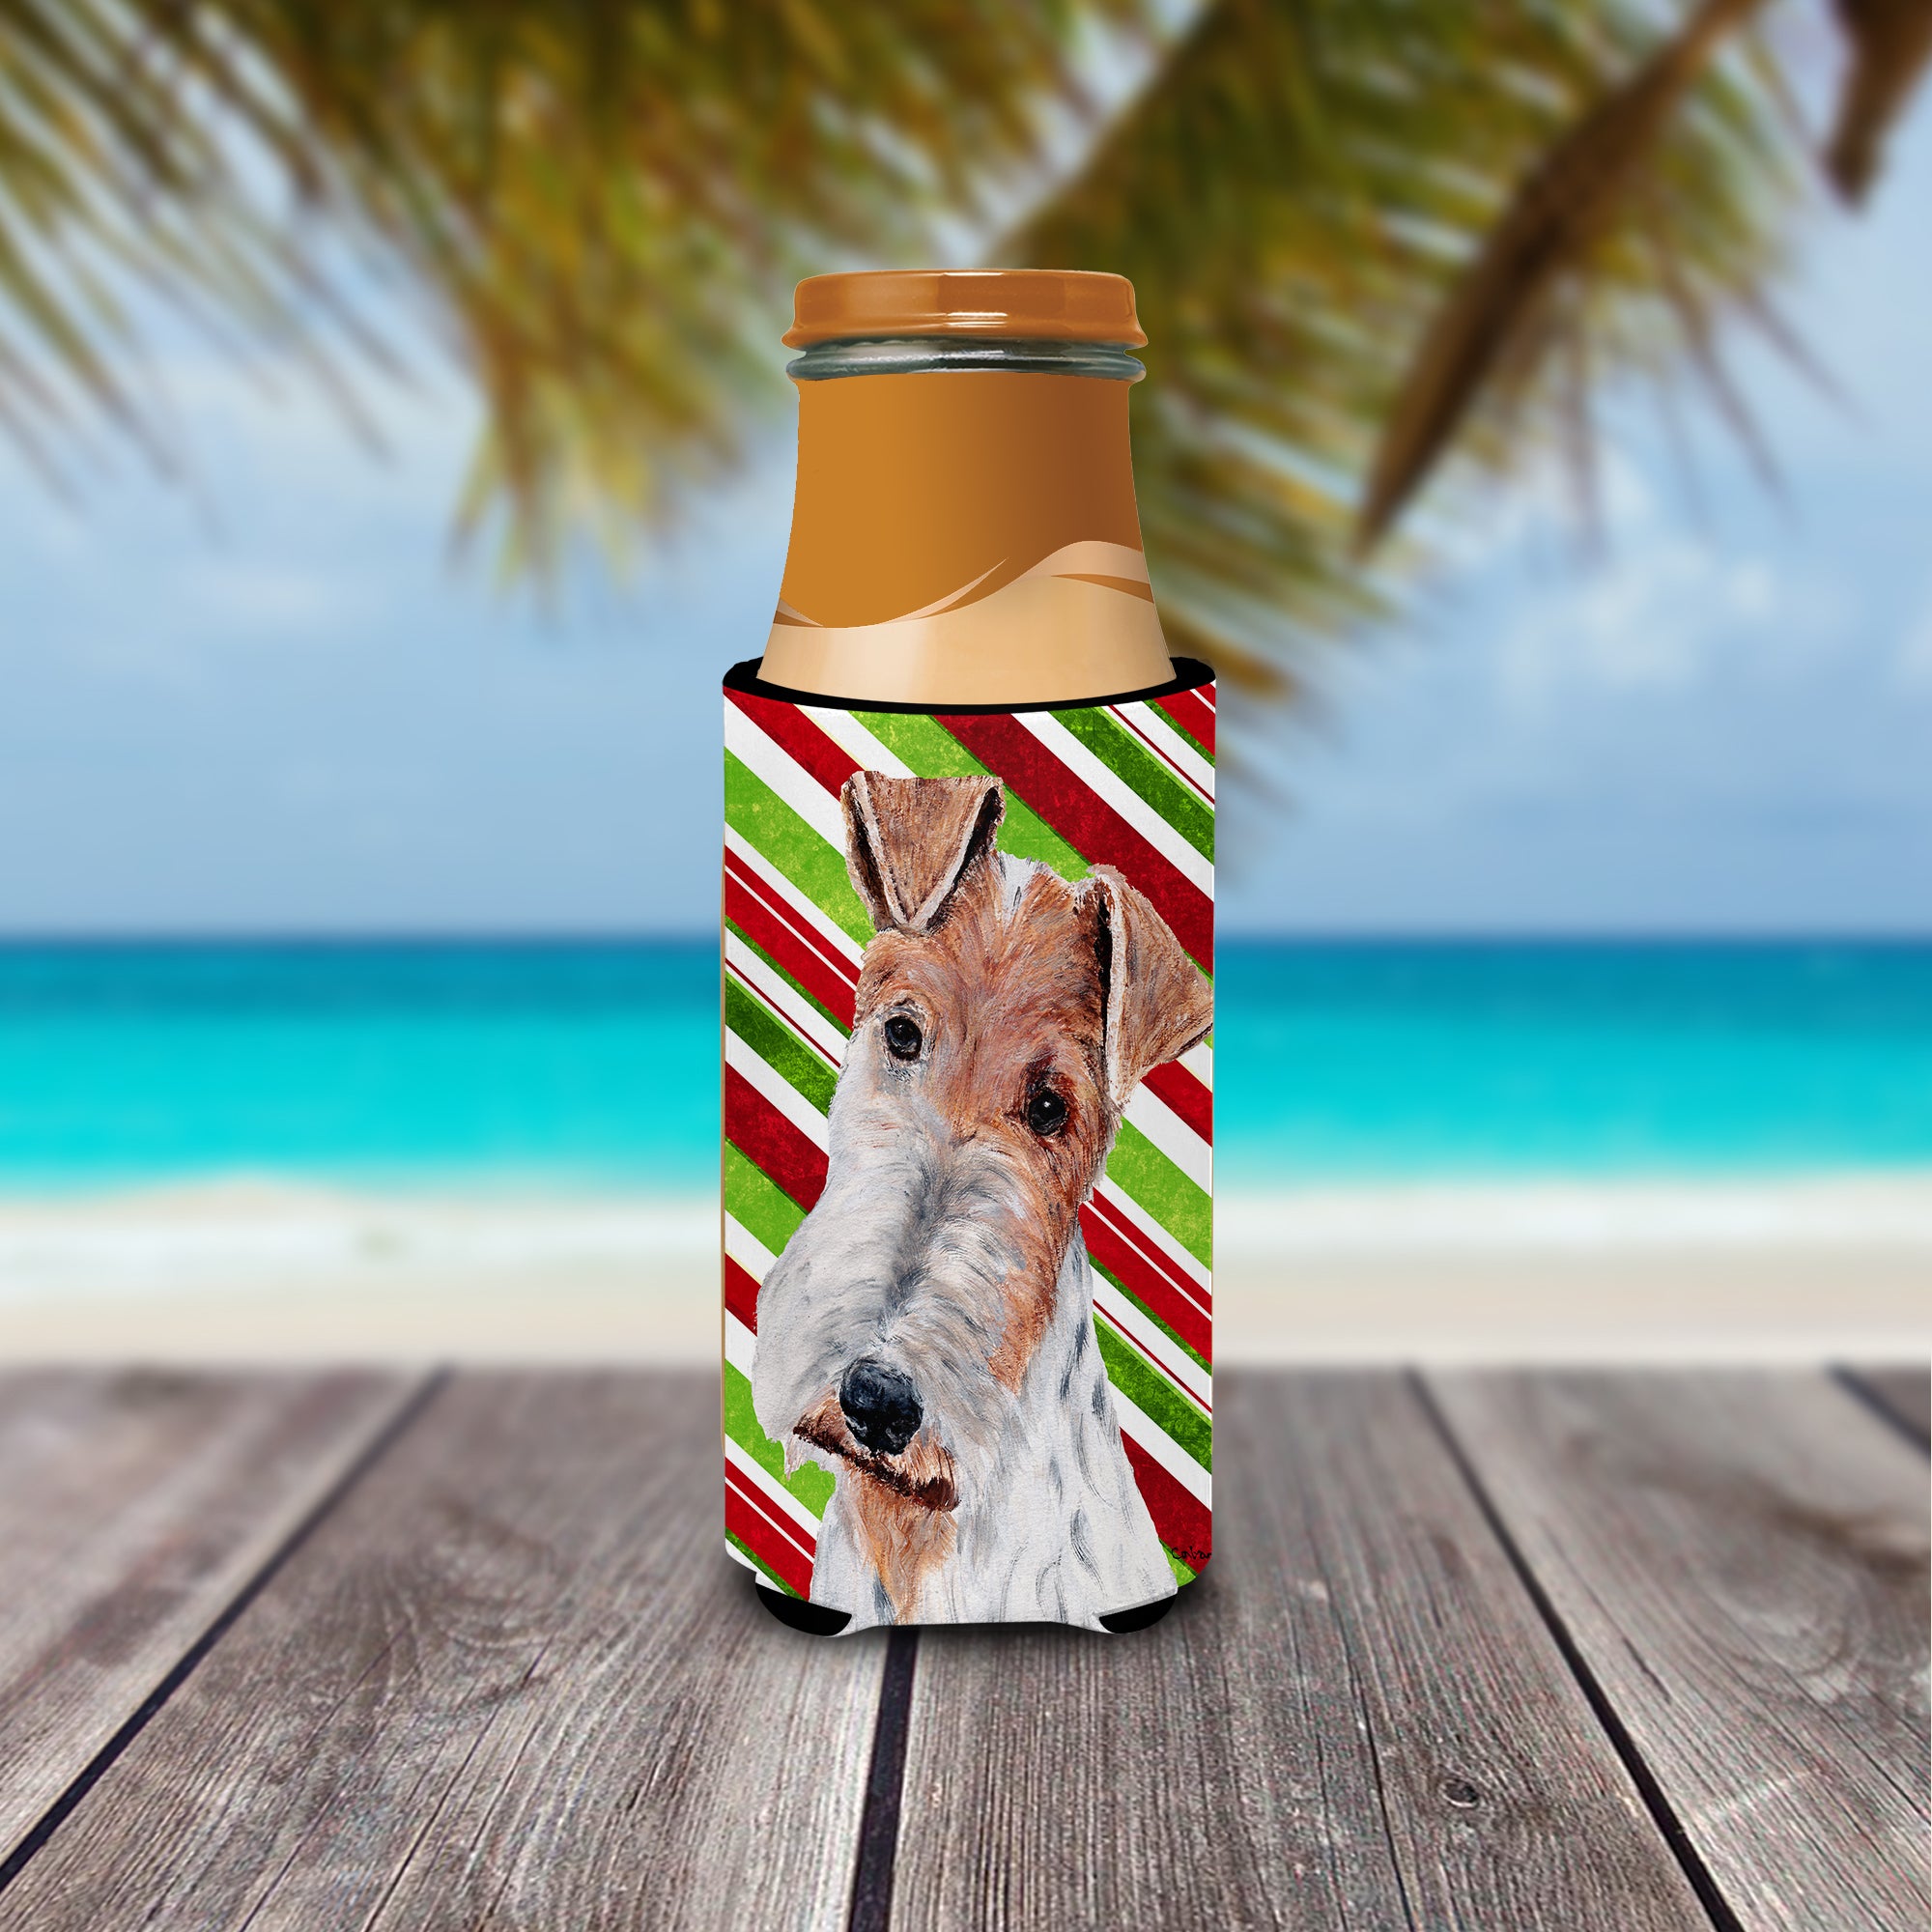 Wire Fox Terrier Candy Cane Christmas Ultra Beverage Insulators for slim cans SC9796MUK.